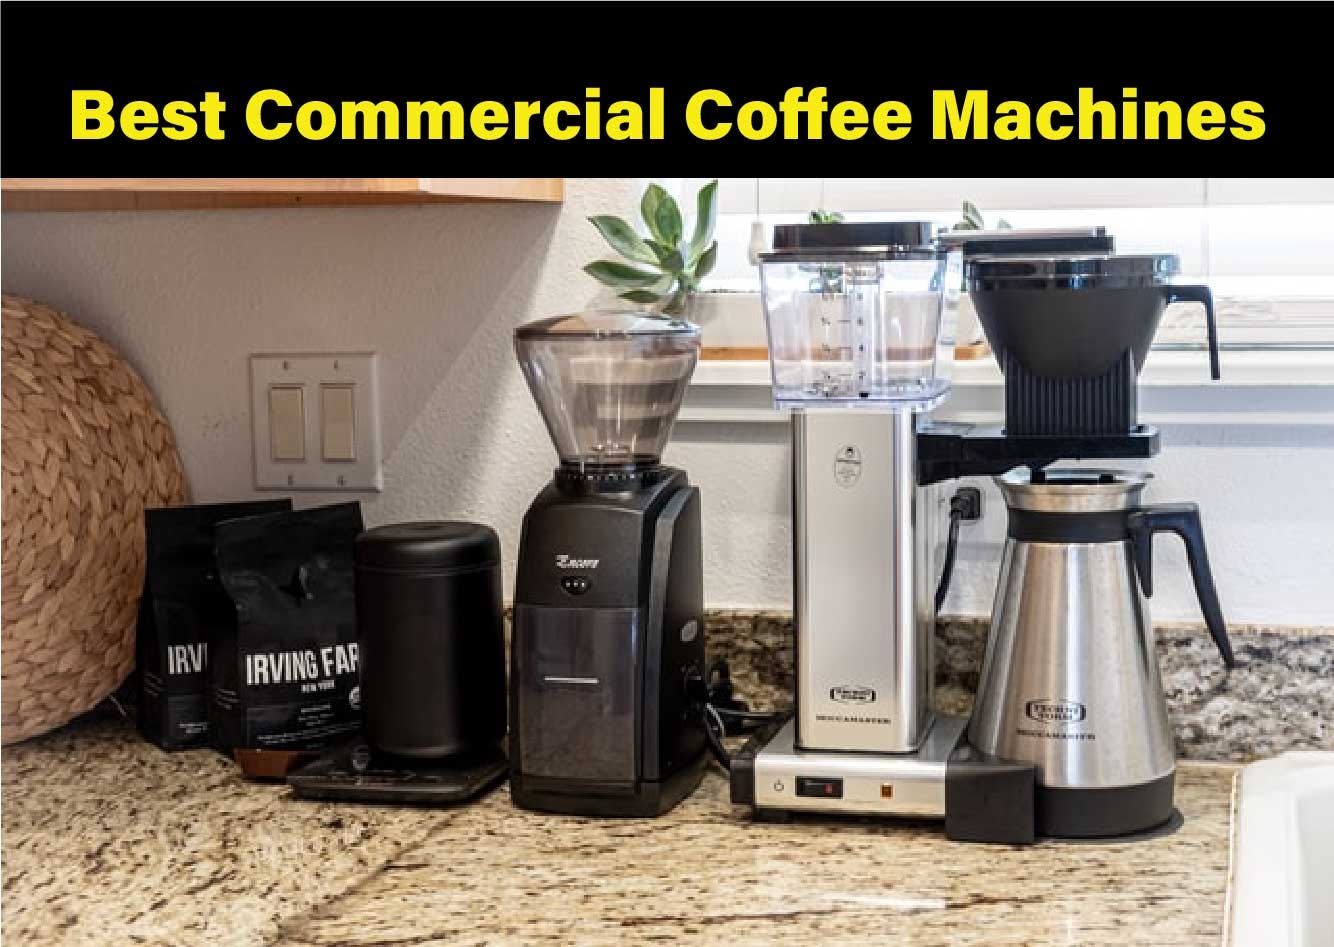 SYBO 12 Cup Commercial Drip Coffee Maker Review, Good quality, makes great  coffee and a lot of it to 